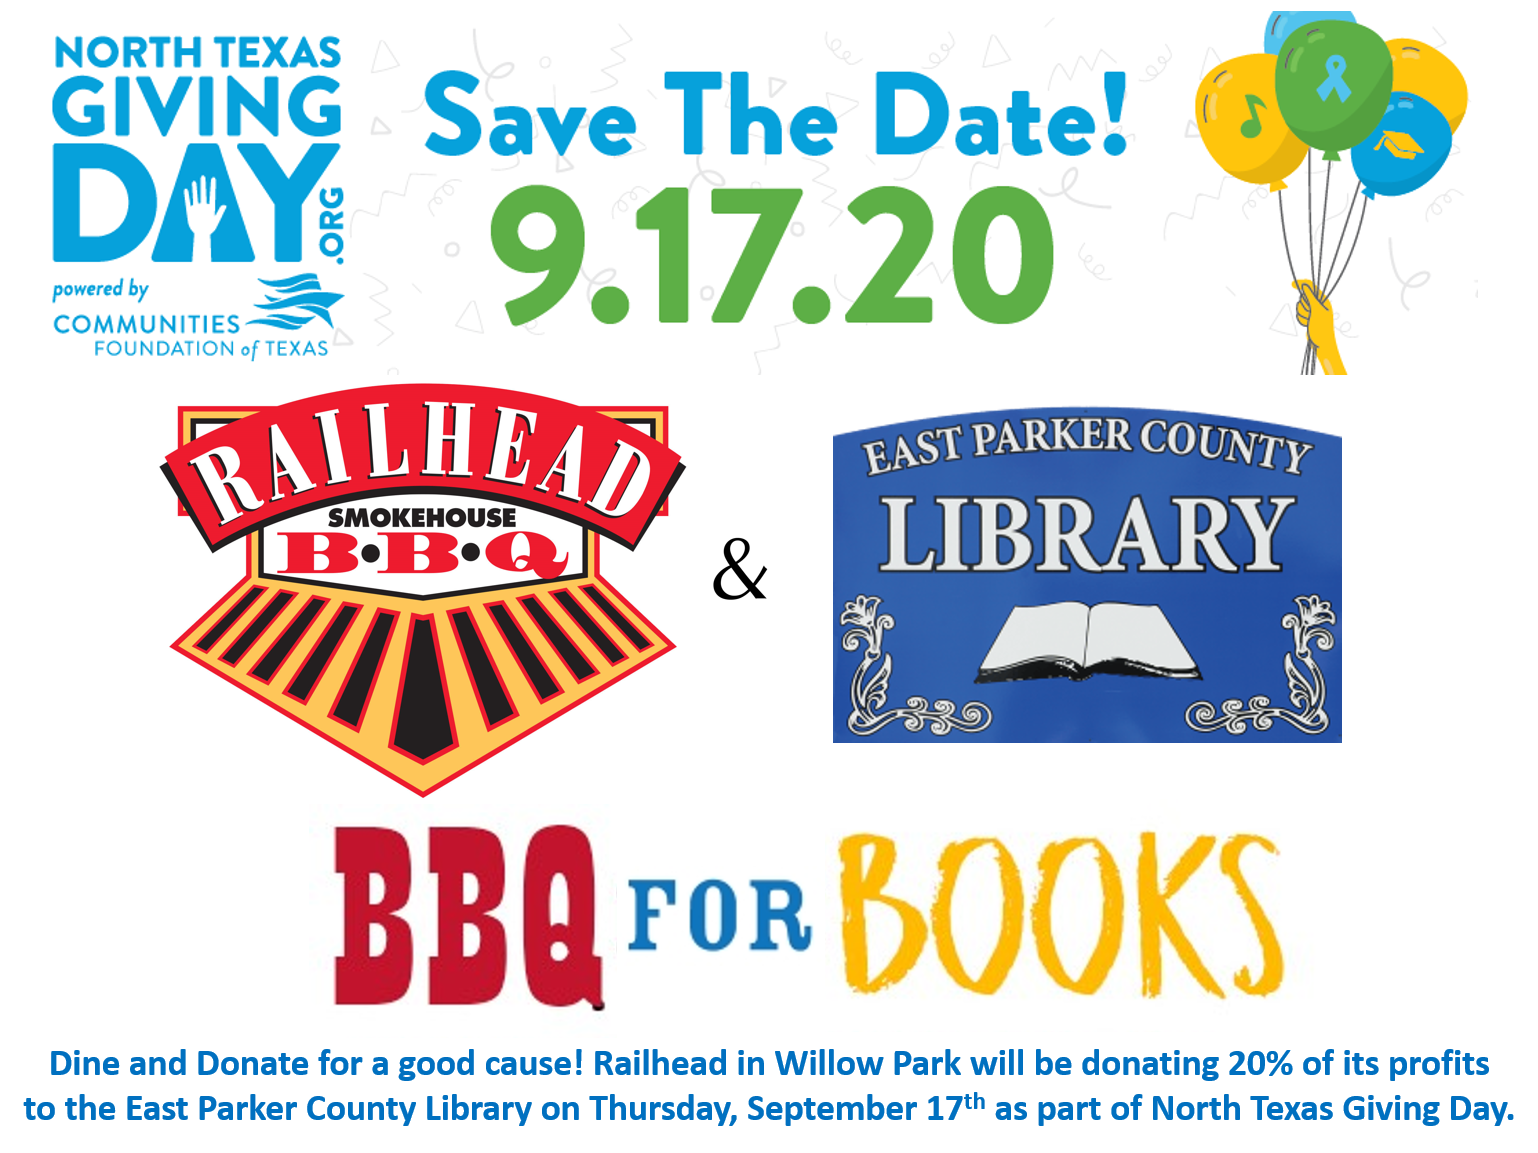 dine and donate with railhead.png